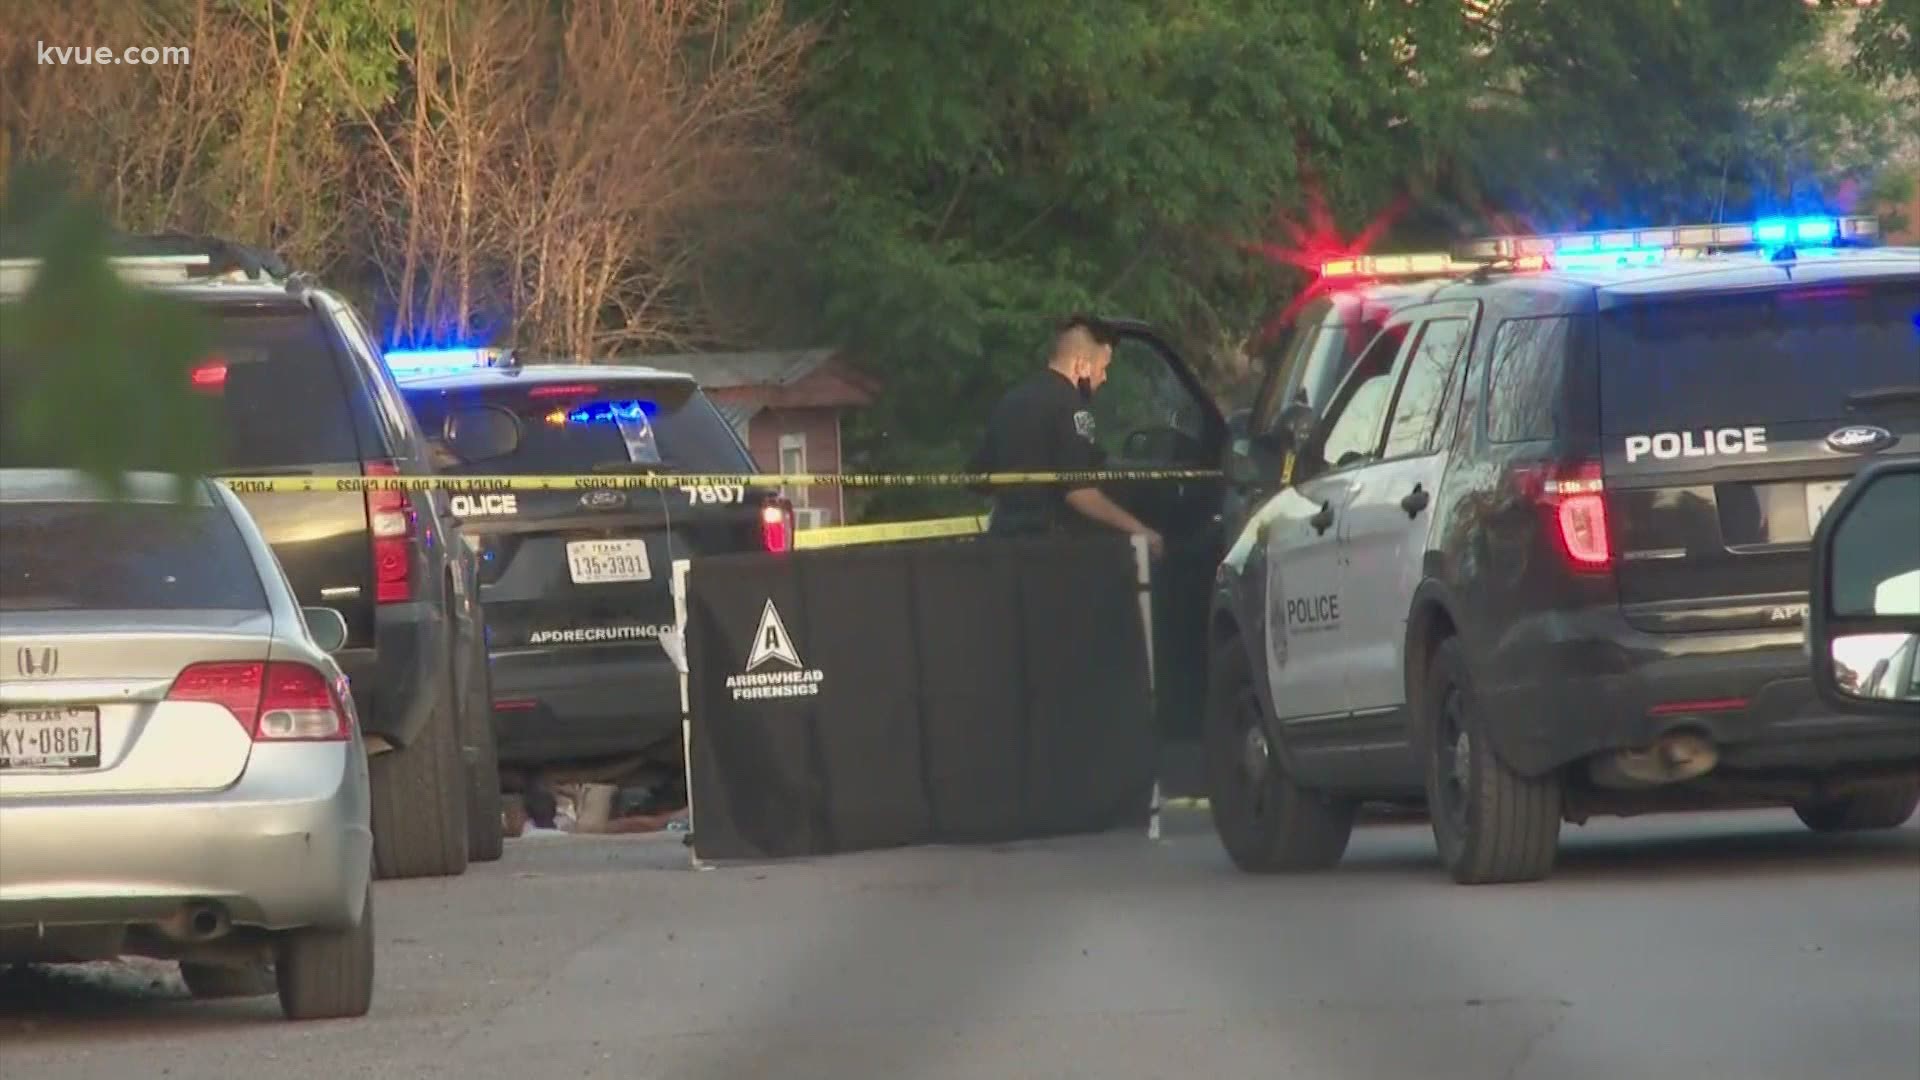 Police have made an arrest in the shooting death of a teenager in North Austin.